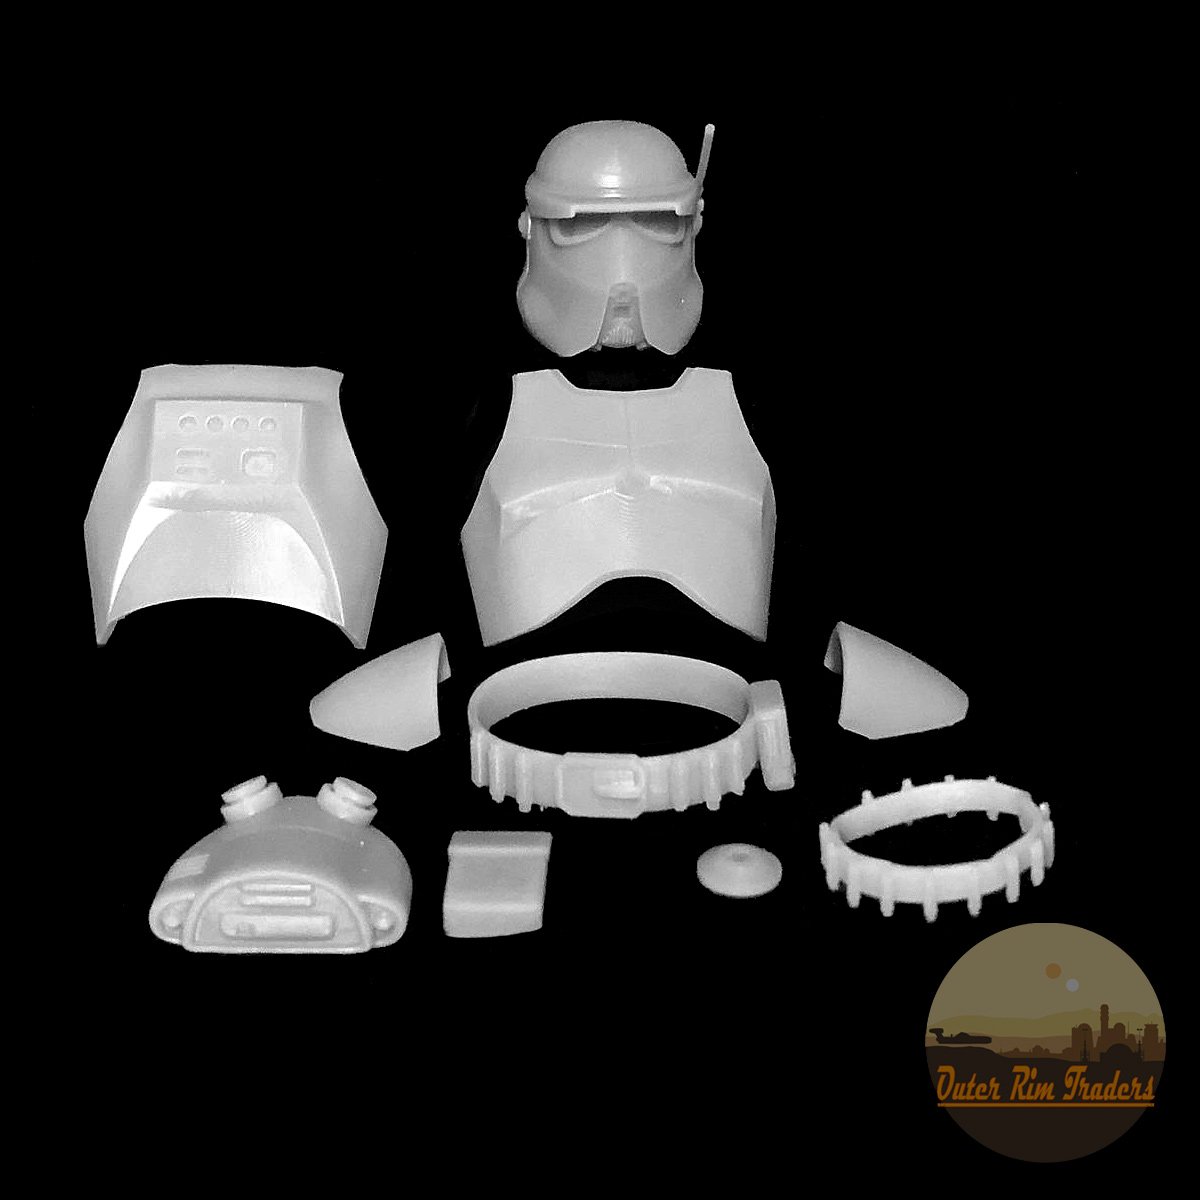 Image of Advance Recon Kit by Skylu3D